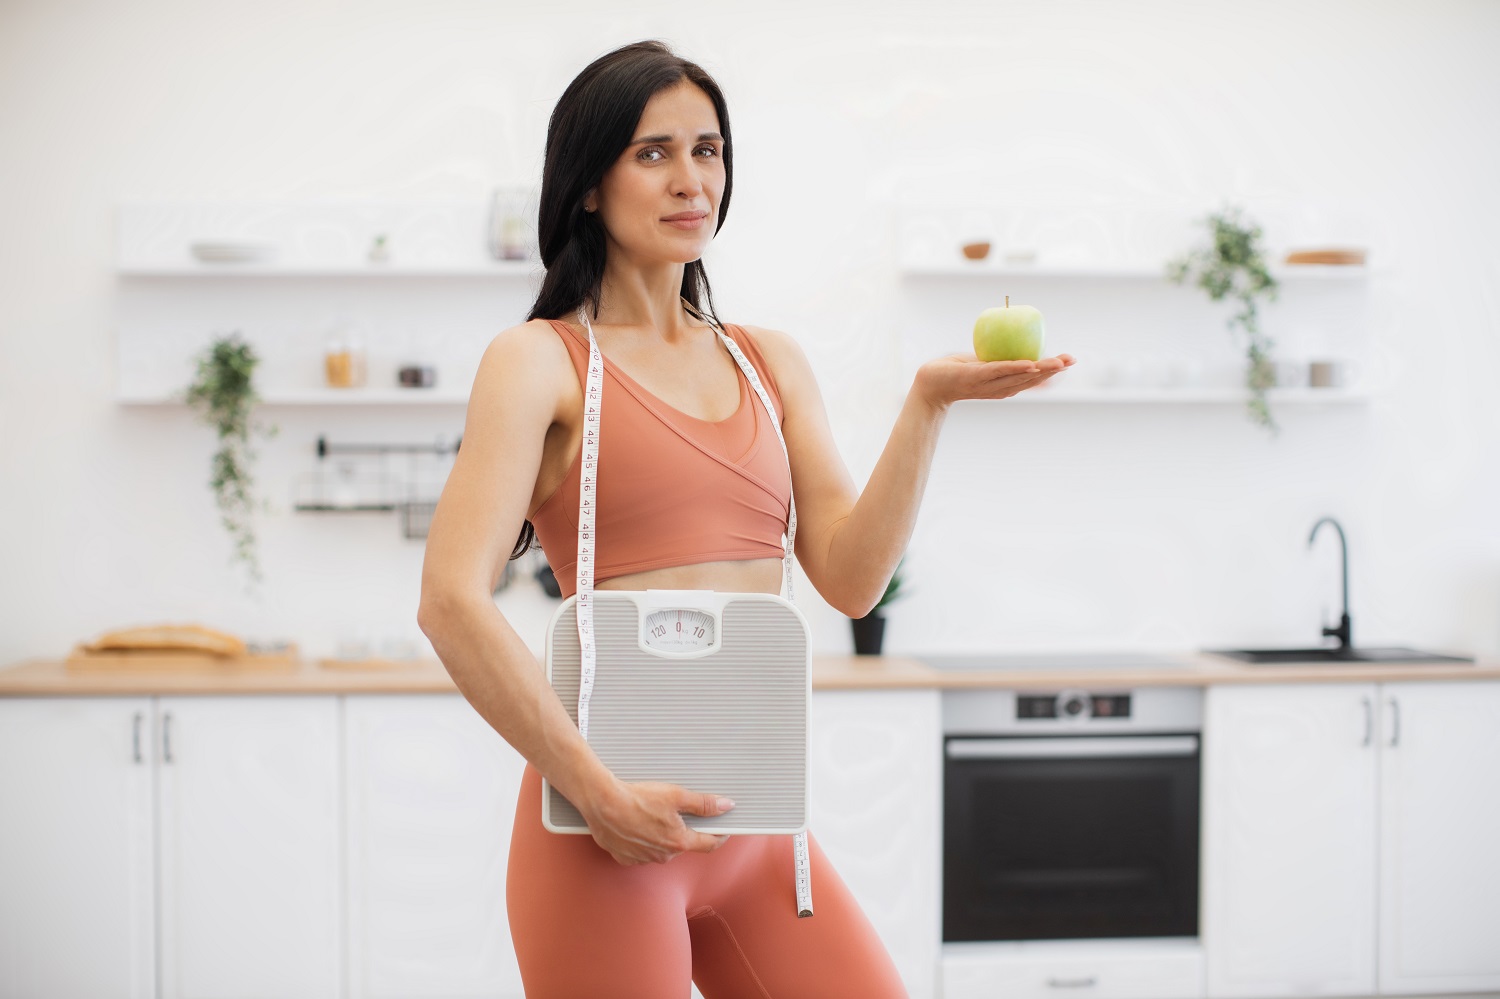 Personal trainer posing with apple and weight scales indoors